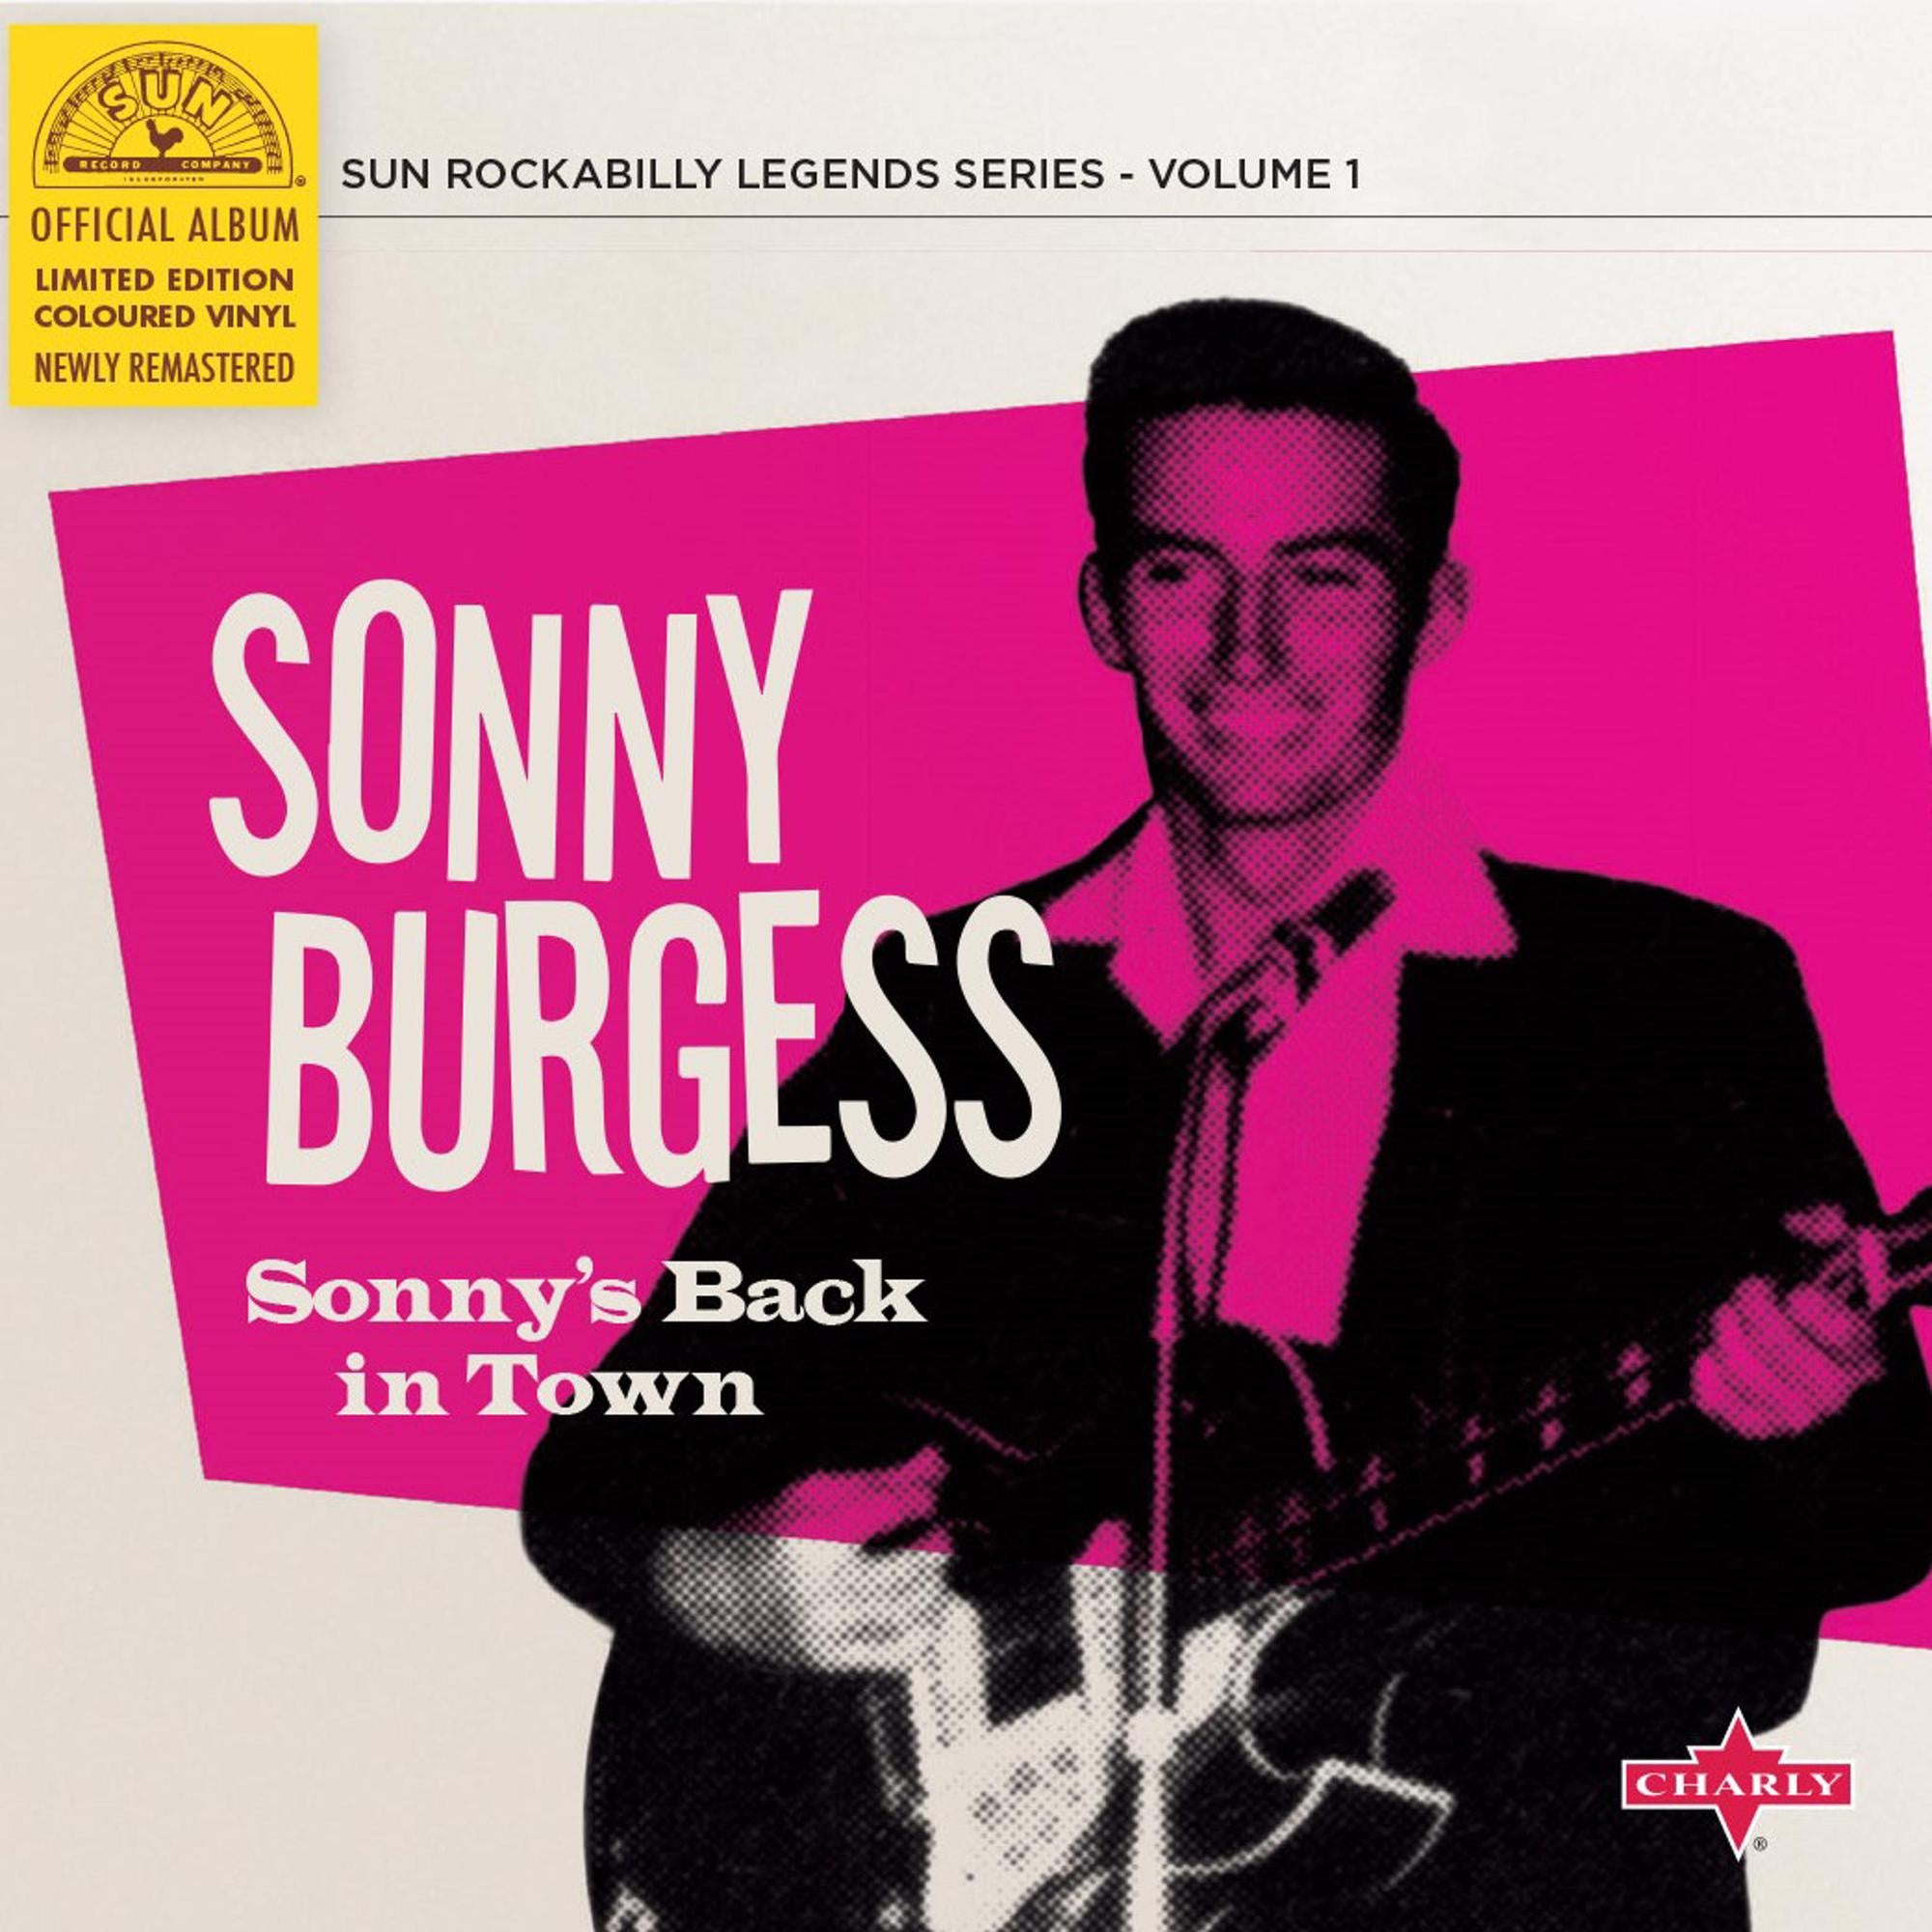 Sonny Burgess – Sonny's Back In Town - New 10" Single Record 2016 Charly Europe Vinyl - Rock / Rockabilly